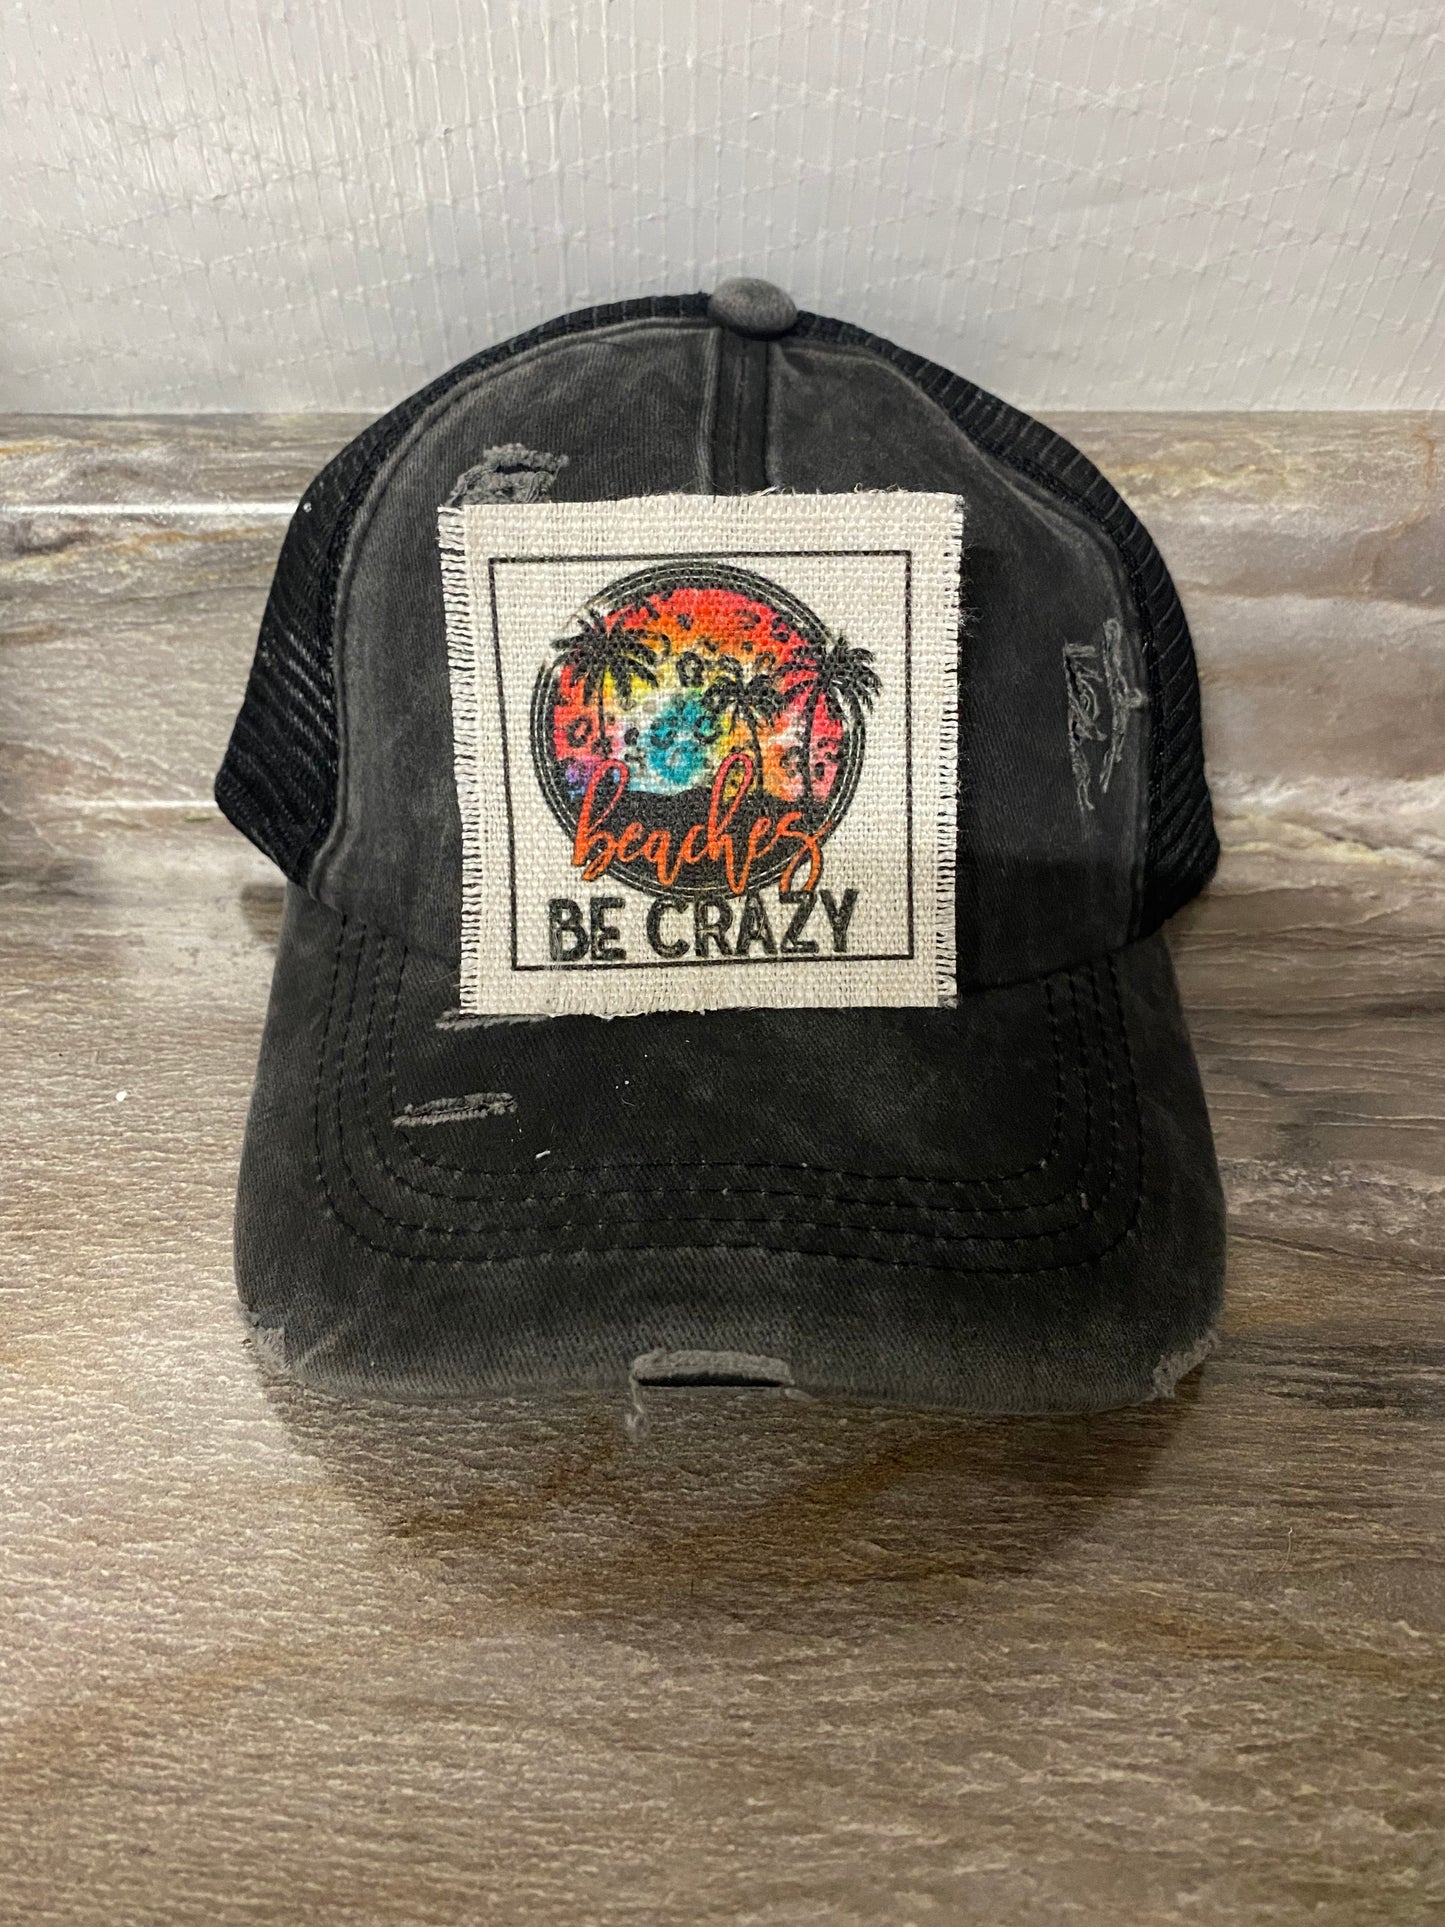 Beaches Be Crazy with Sunset Hat Patch